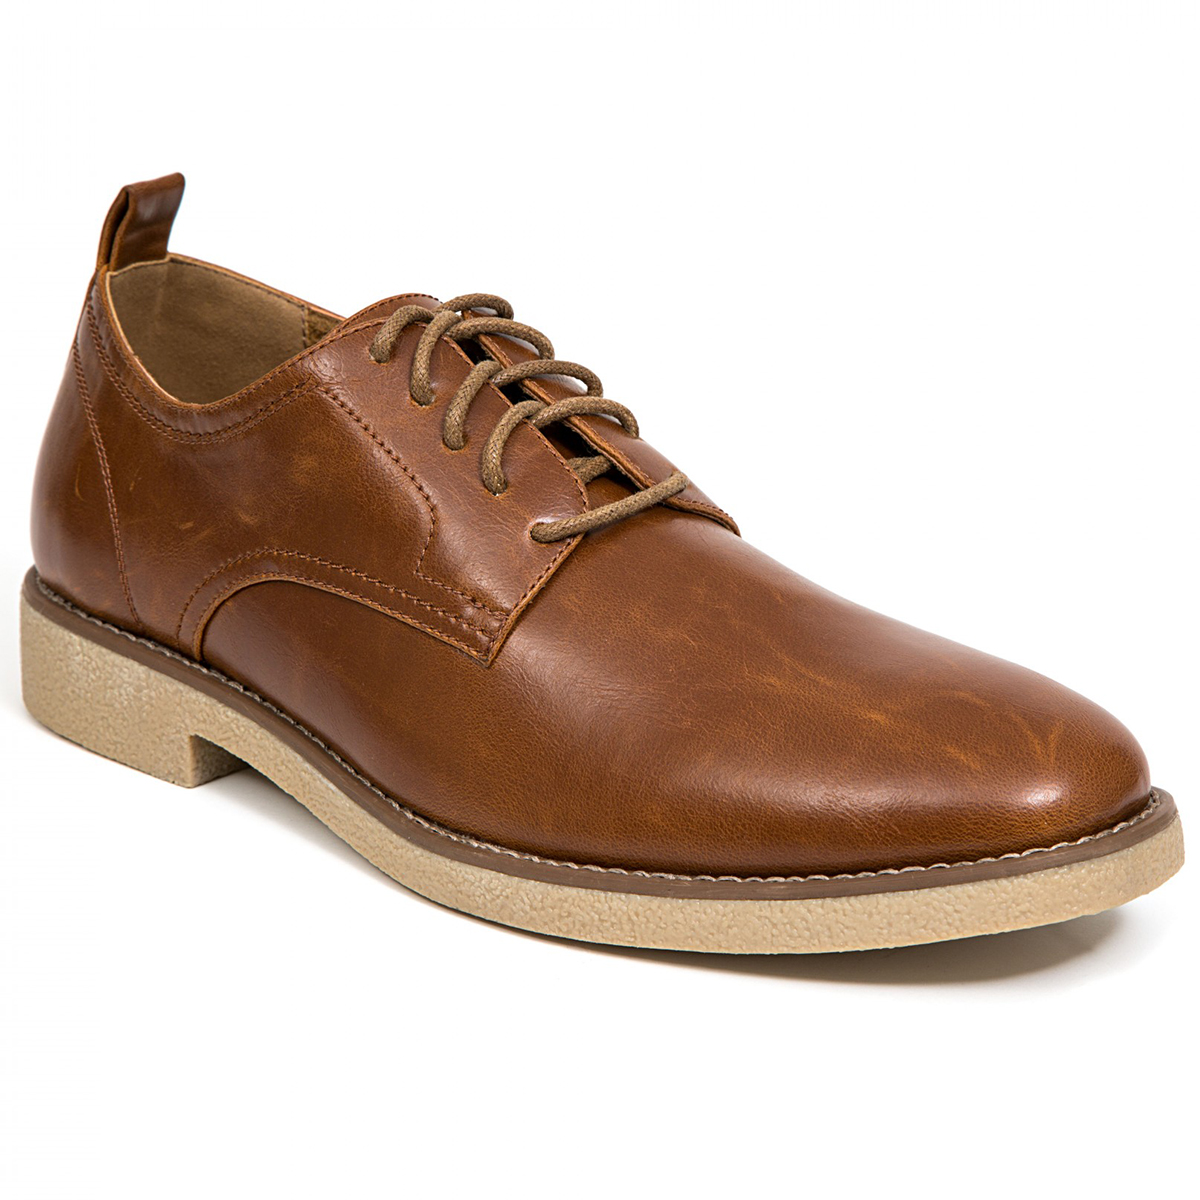 Deer Stags Men's Highland Lace-Up Oxford Dress Shoes - Brown, 12